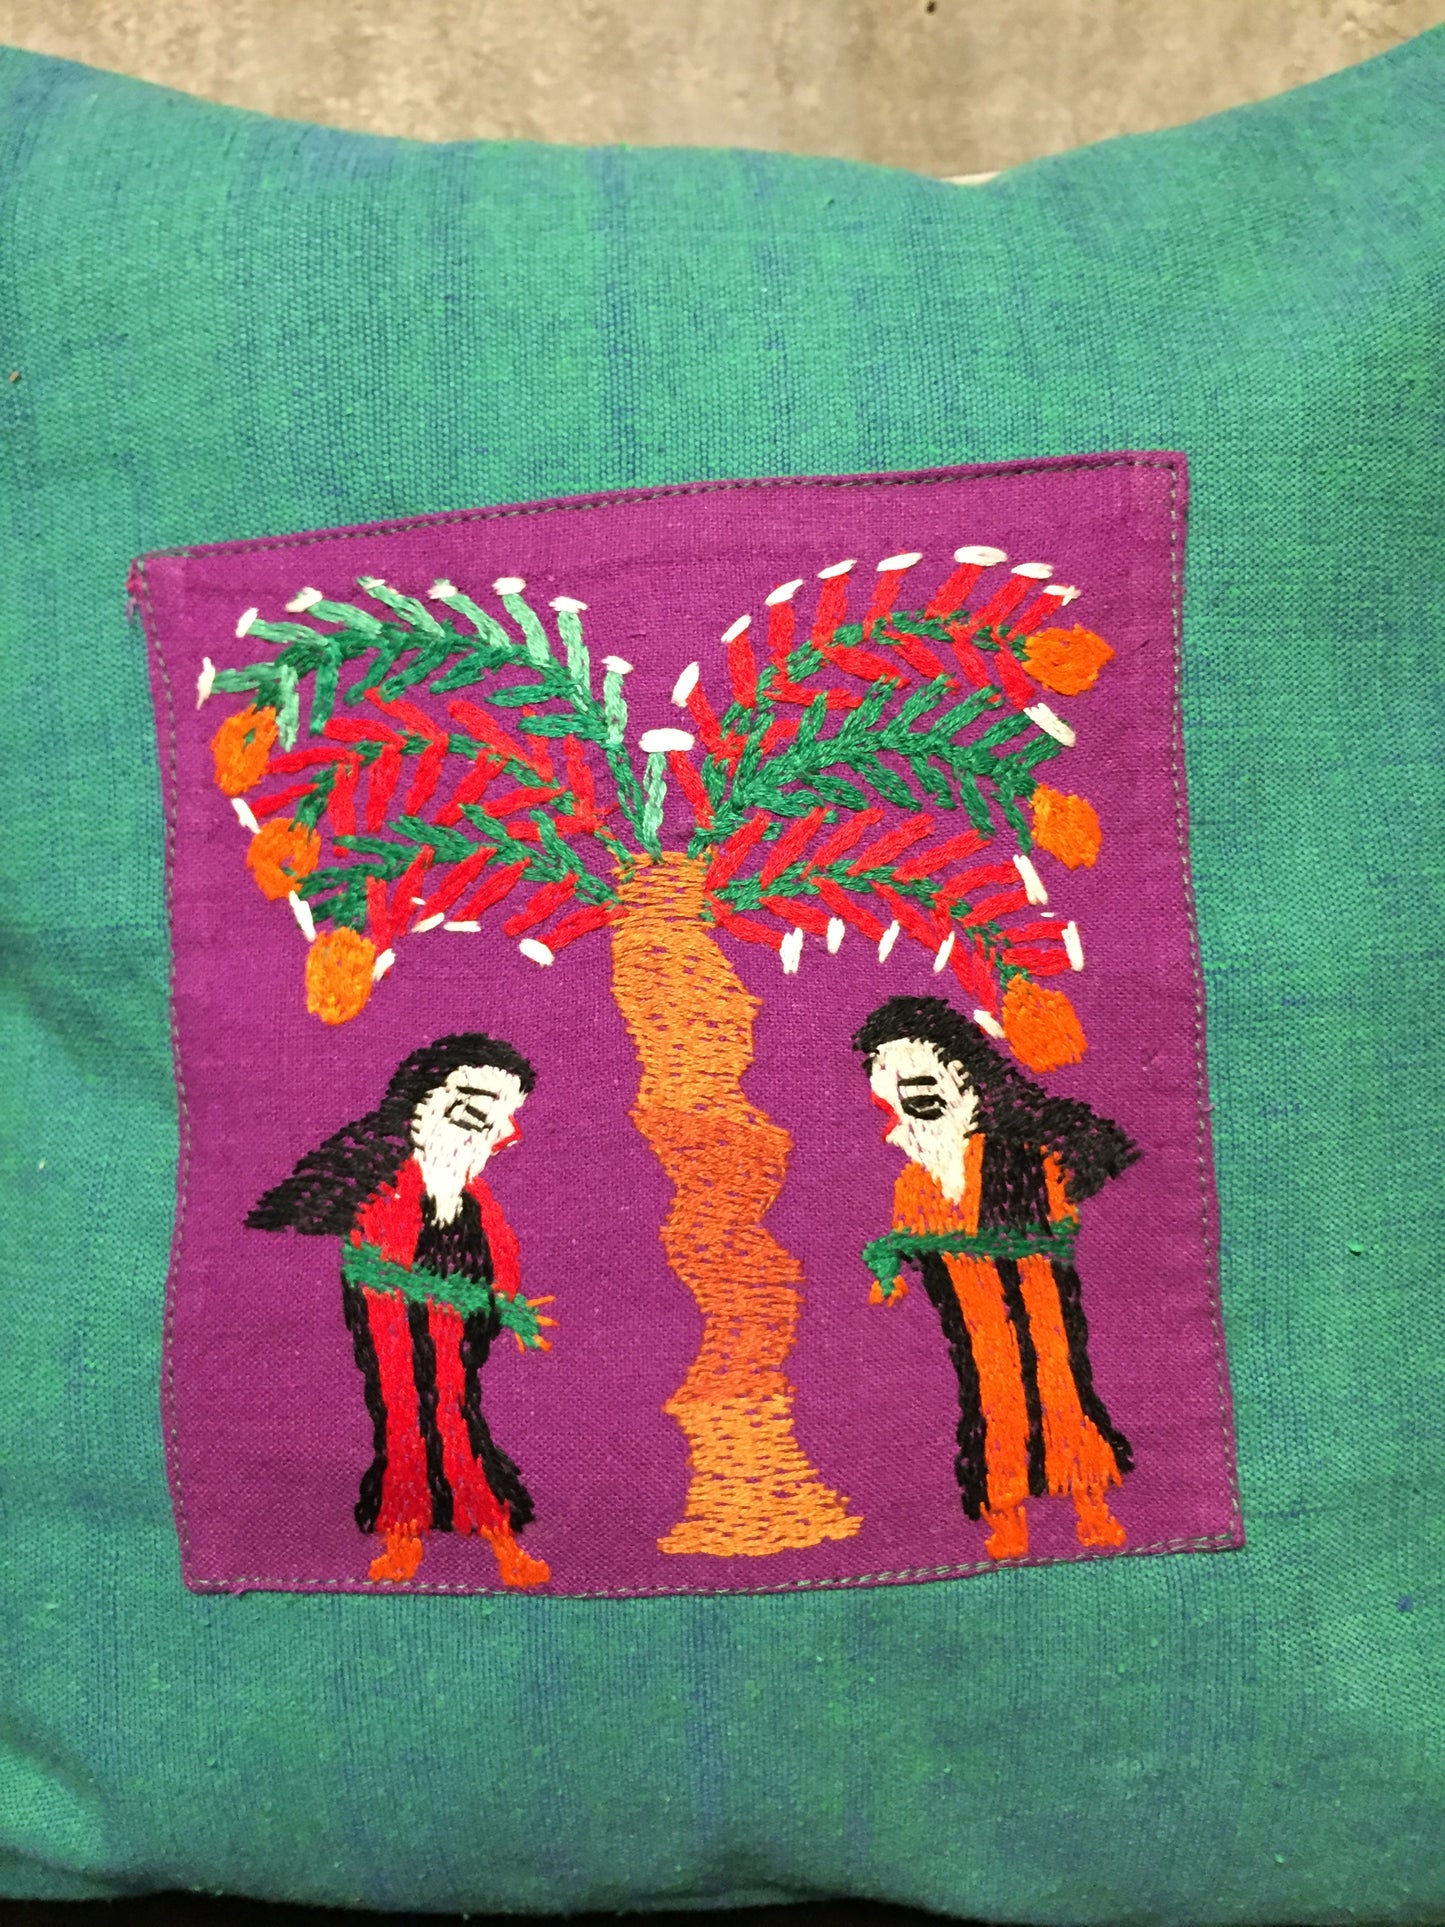 Handwoven Egyptian Cotton Cushion Cover - Hand Embroidered Art - Women Under Palm Tree